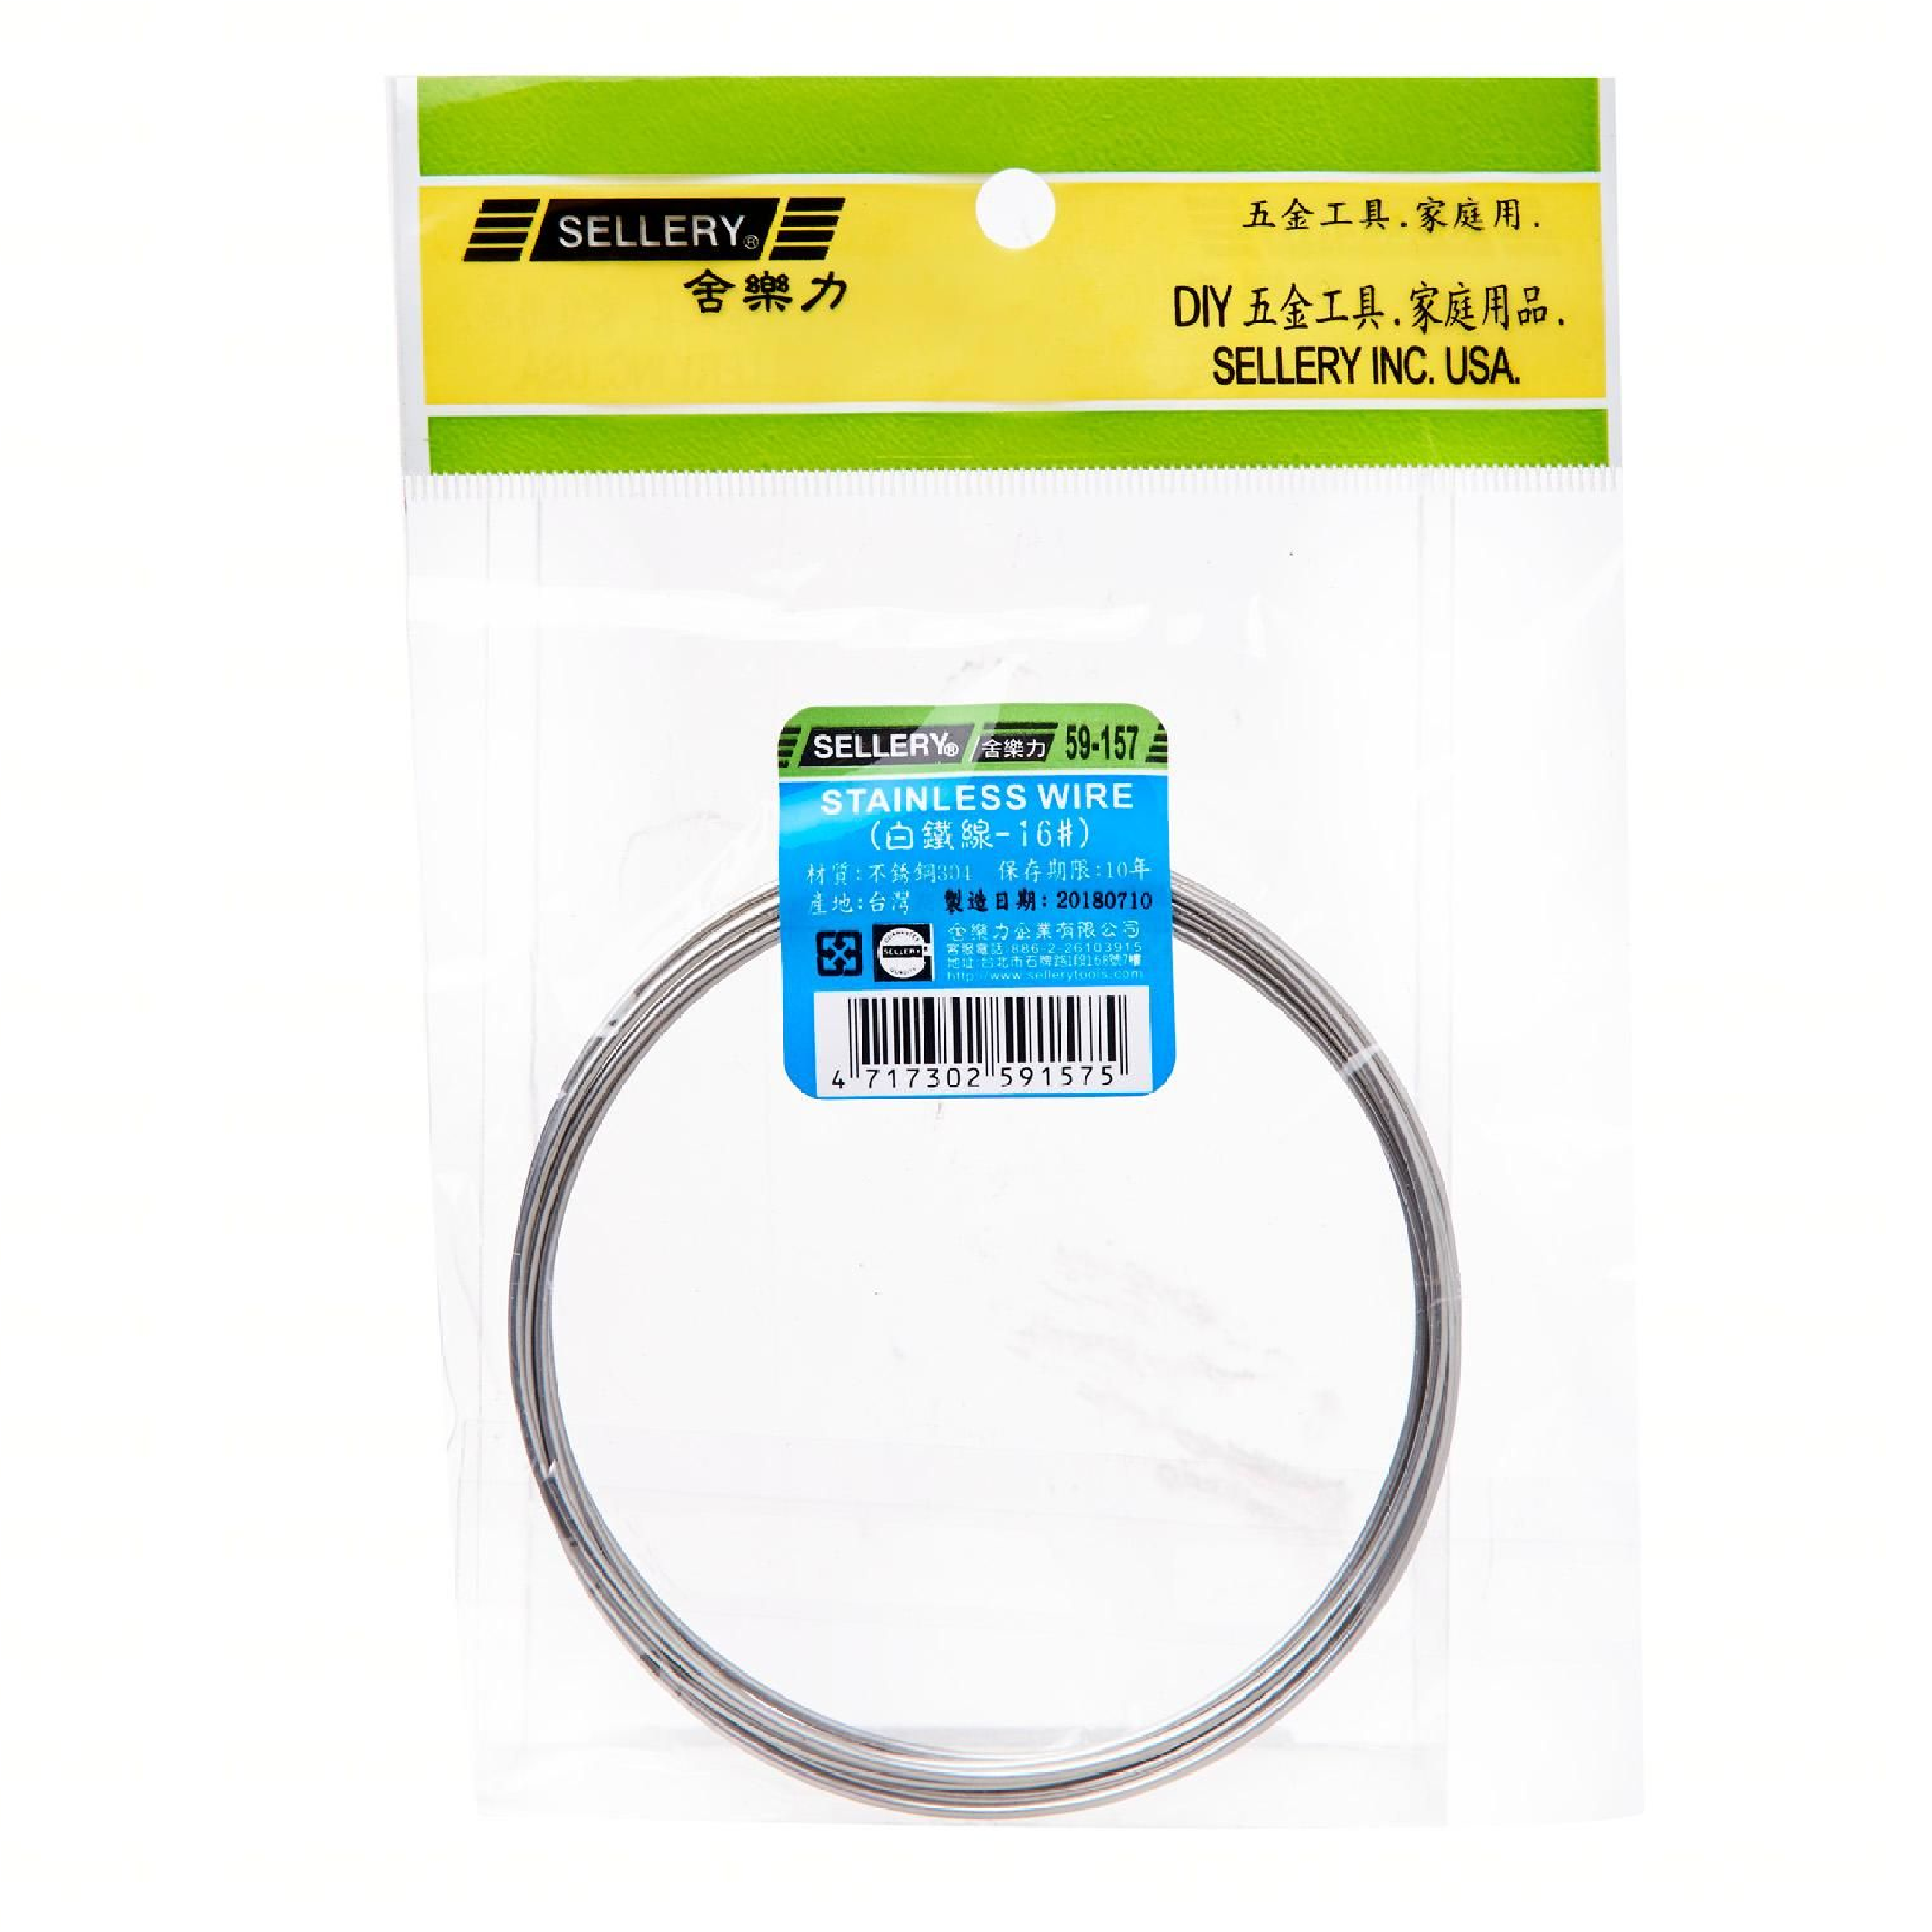 Sellery 59-157 Stainless Steel Wire #16 X 390CM (1.5MM)